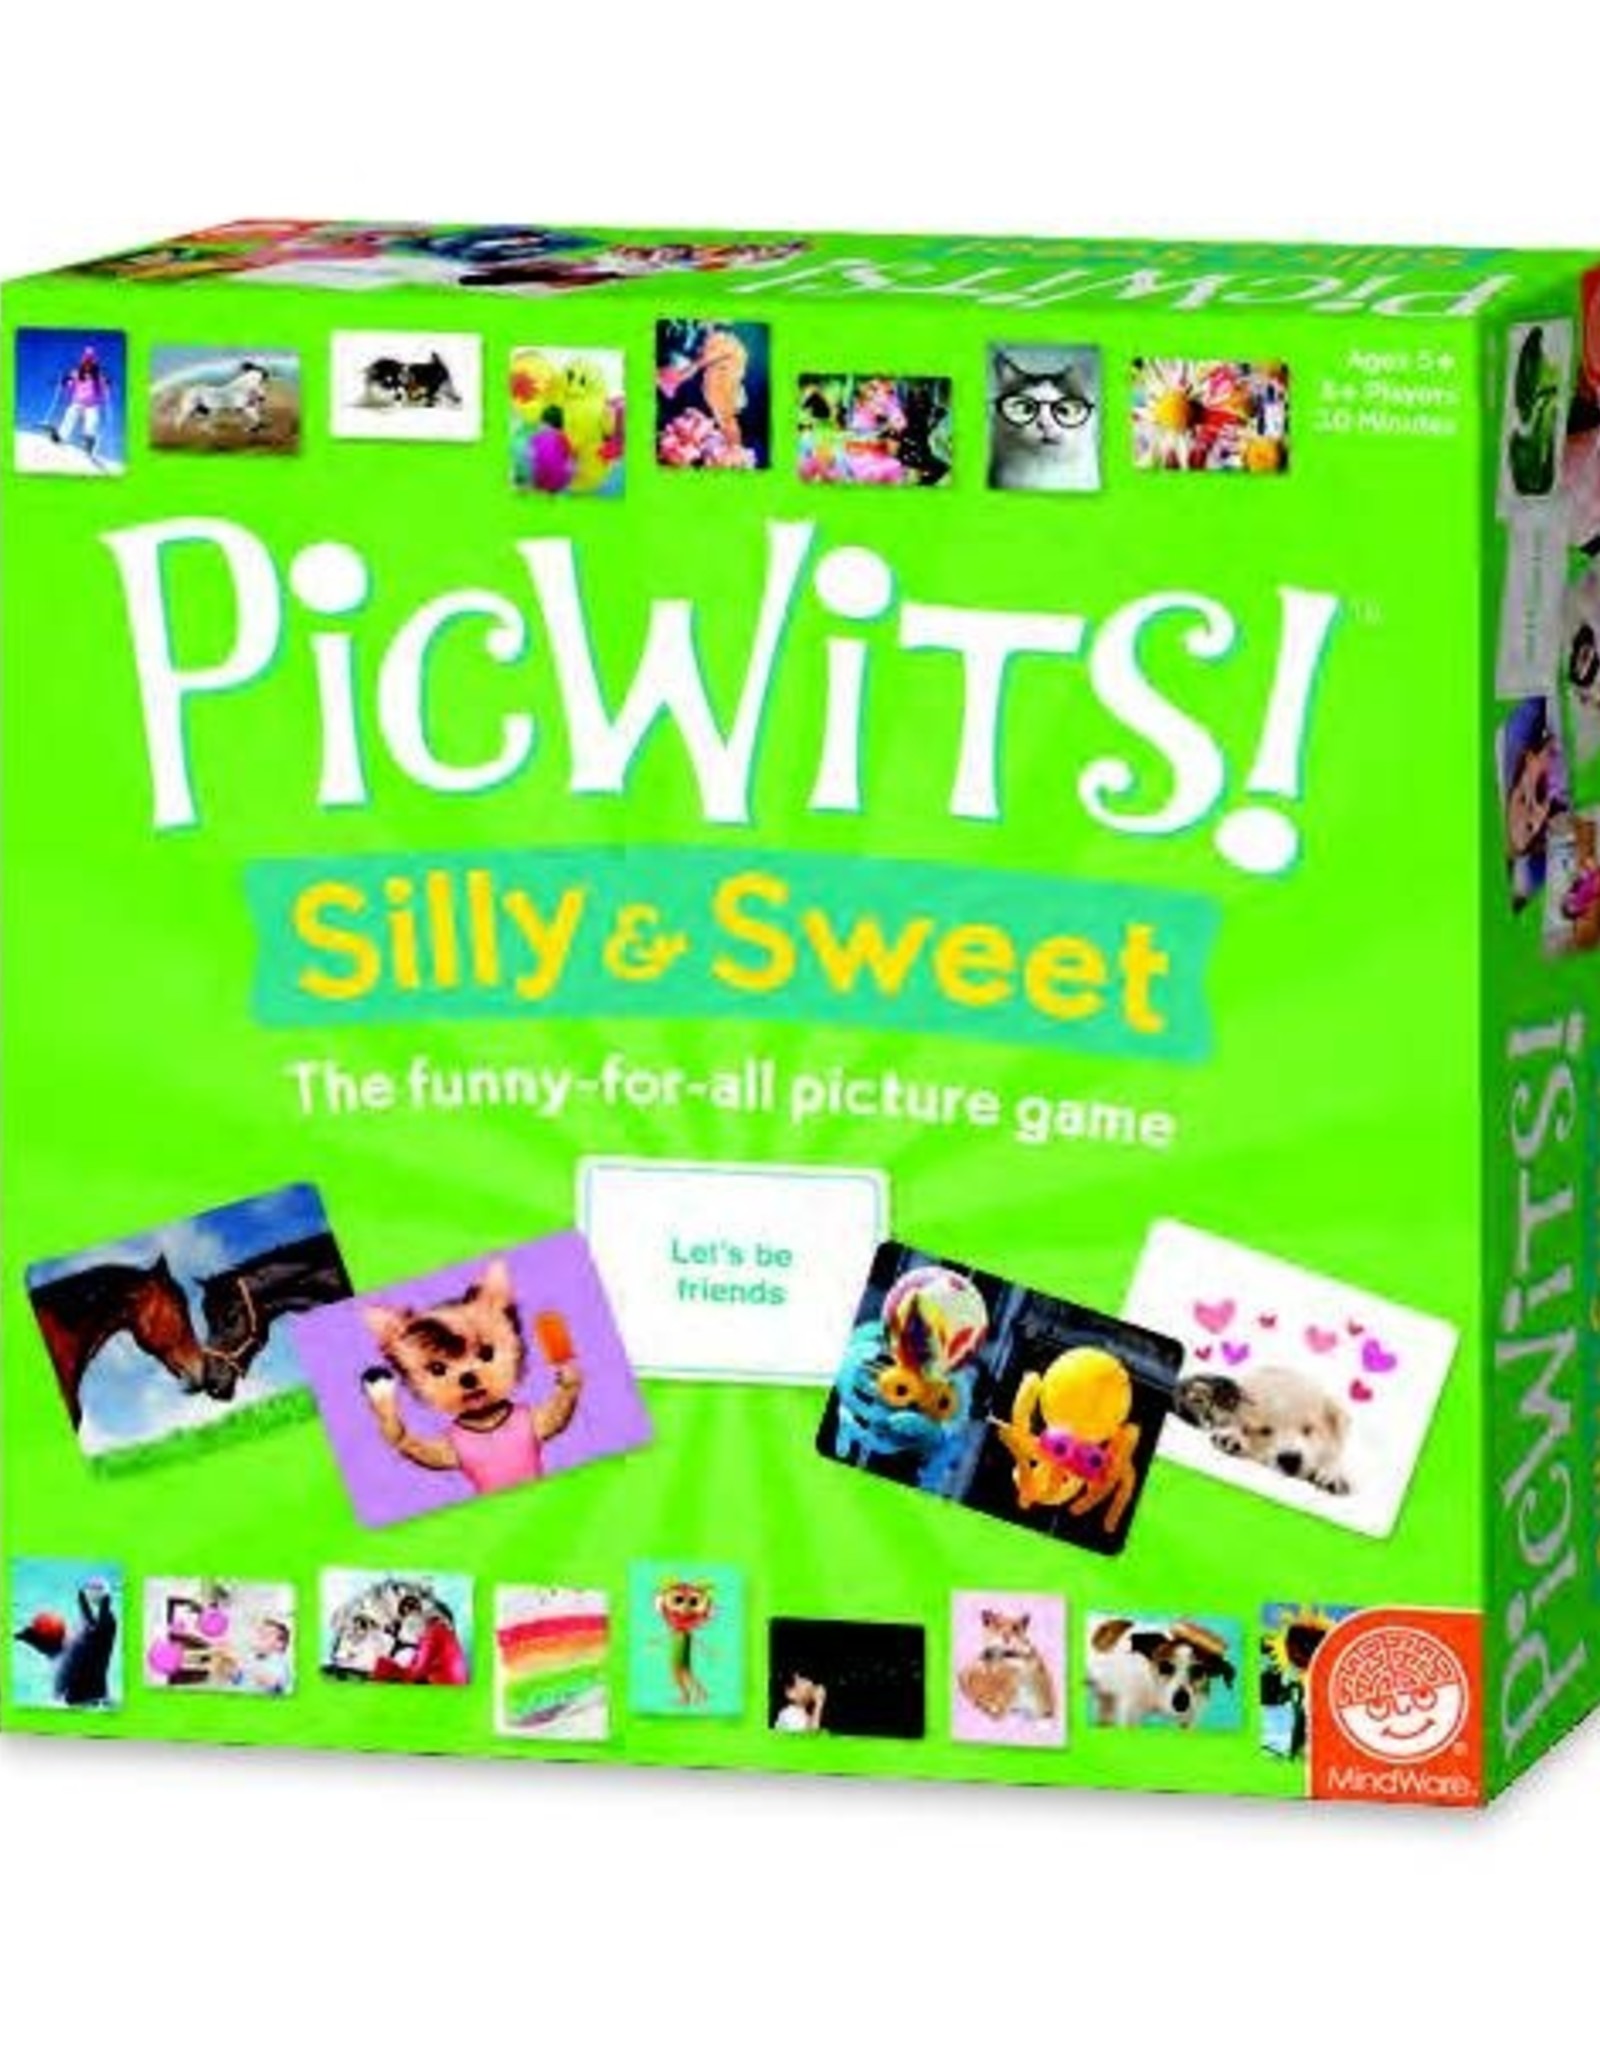 Mindware PicWits! Silly & Sweet